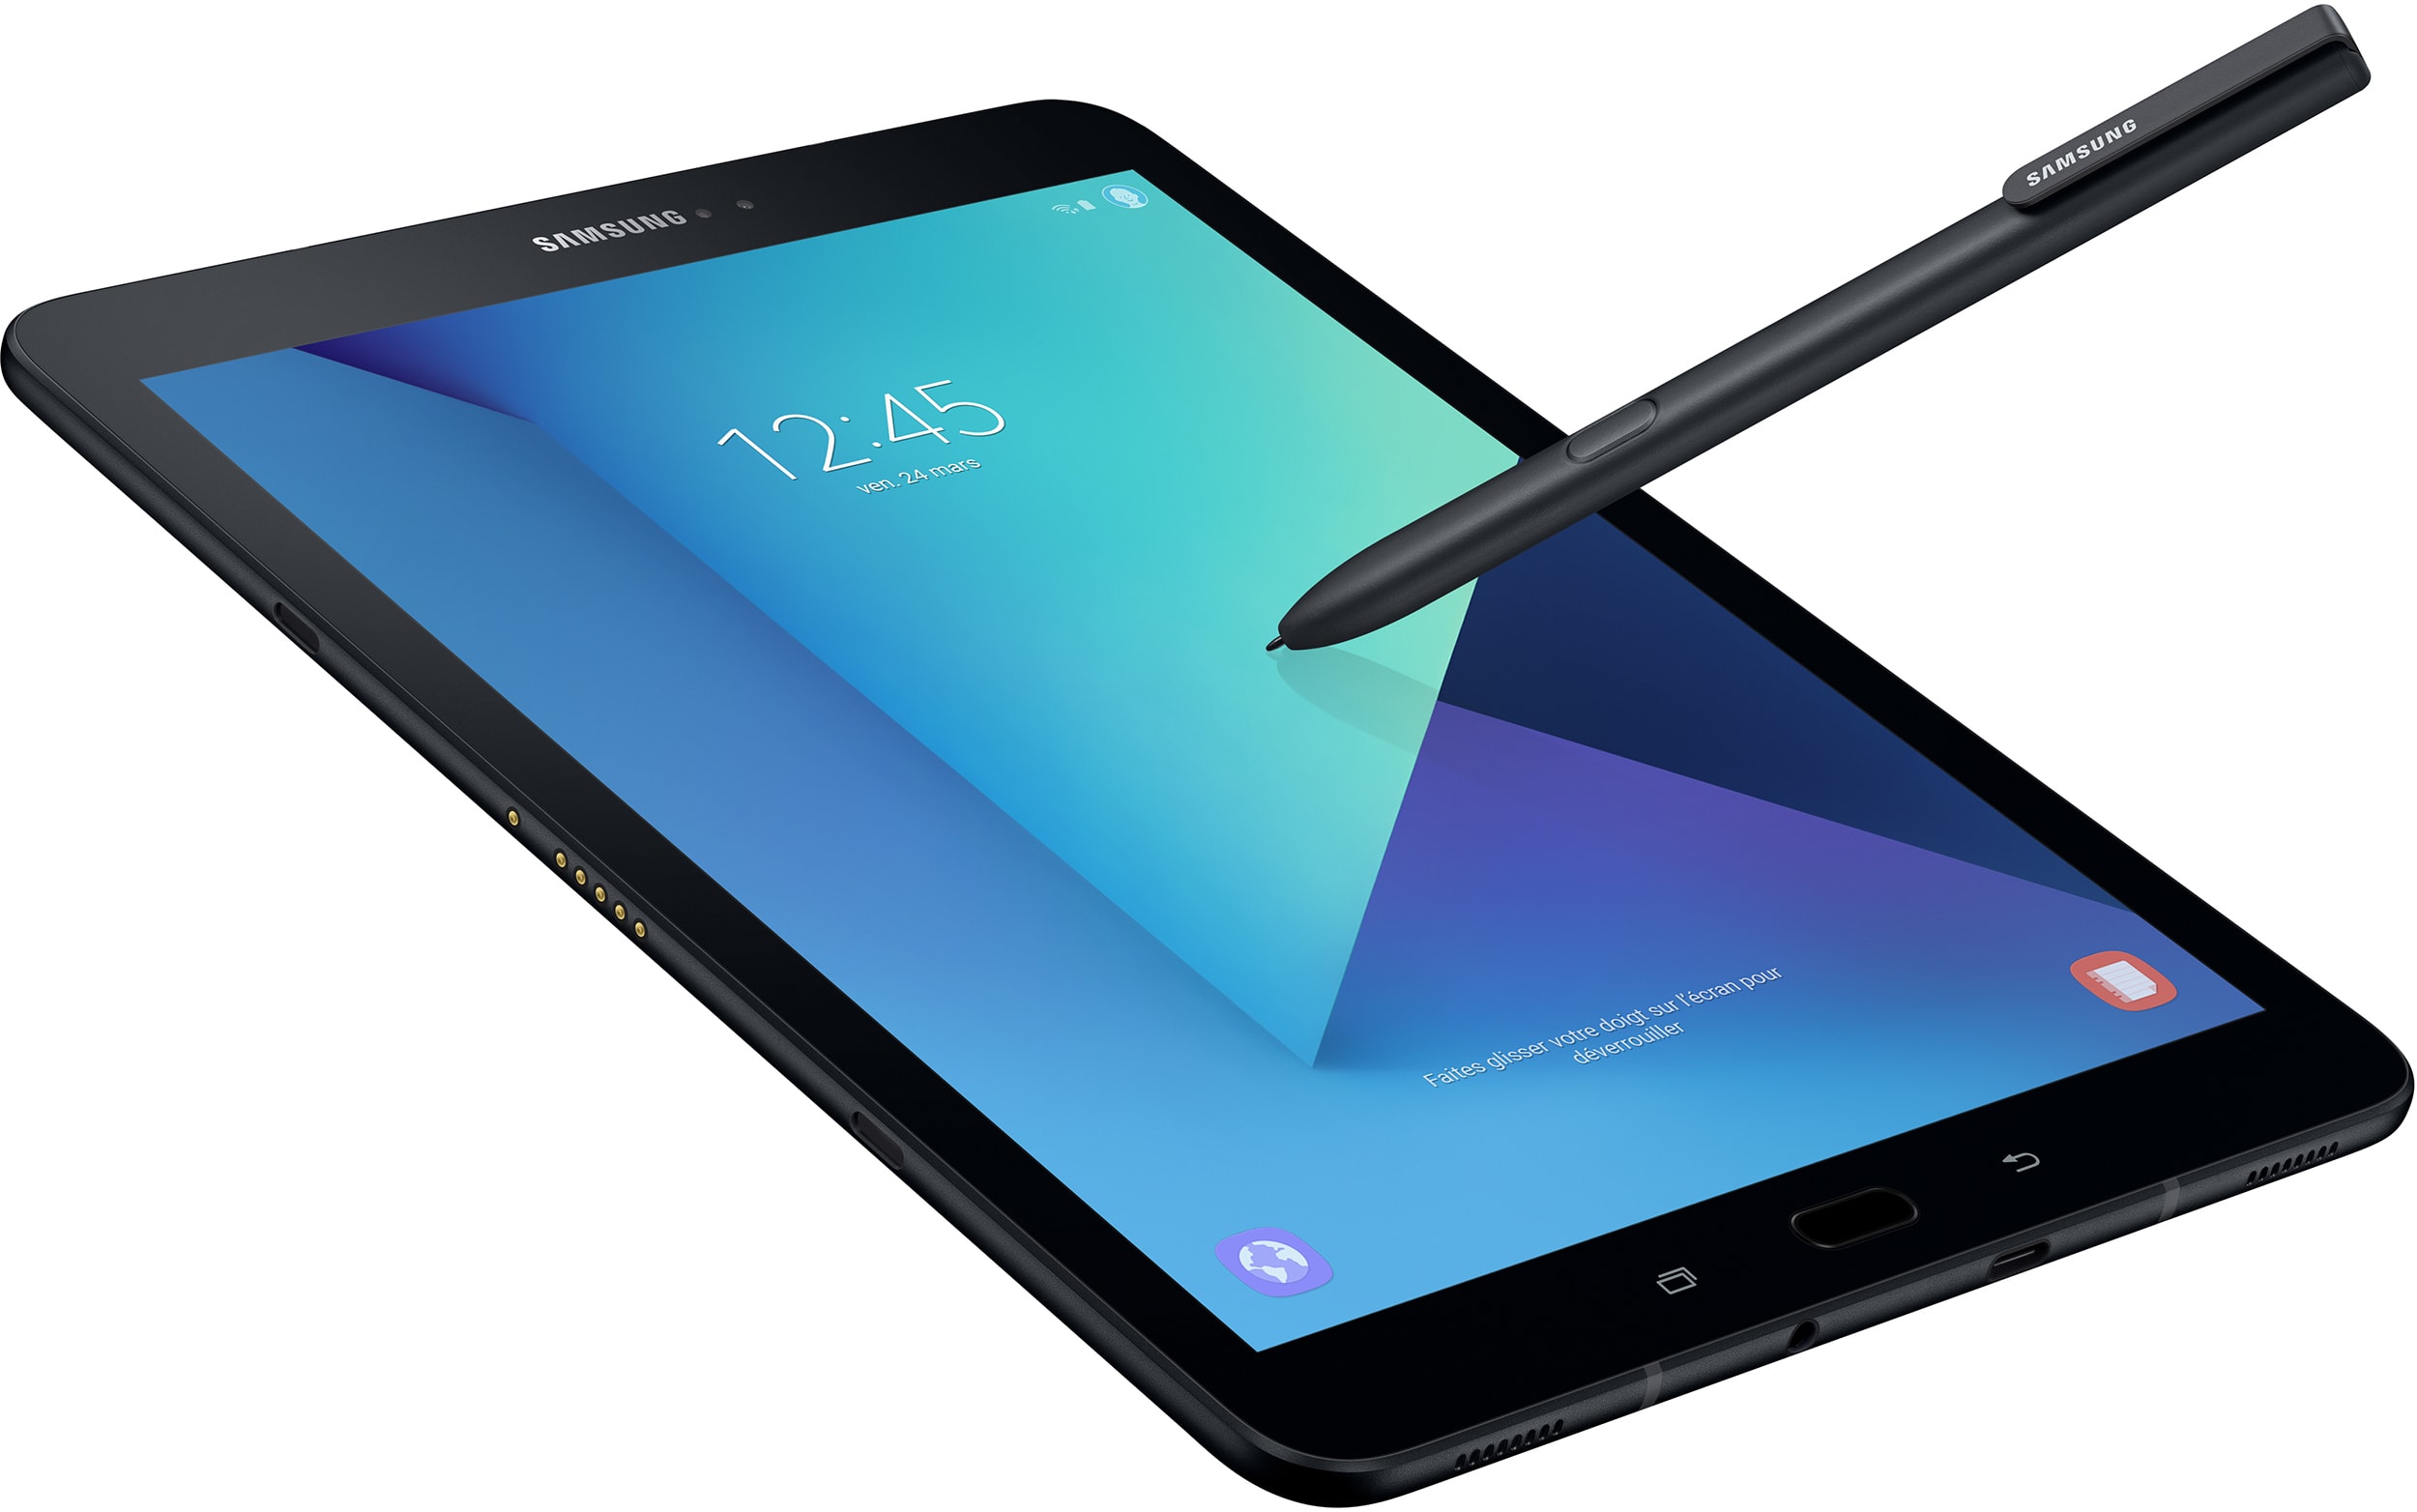 SAMSUNG Galaxy Tab S2 9.7'' 4G - 32Go blanc - Tablette tactile Pas Cher